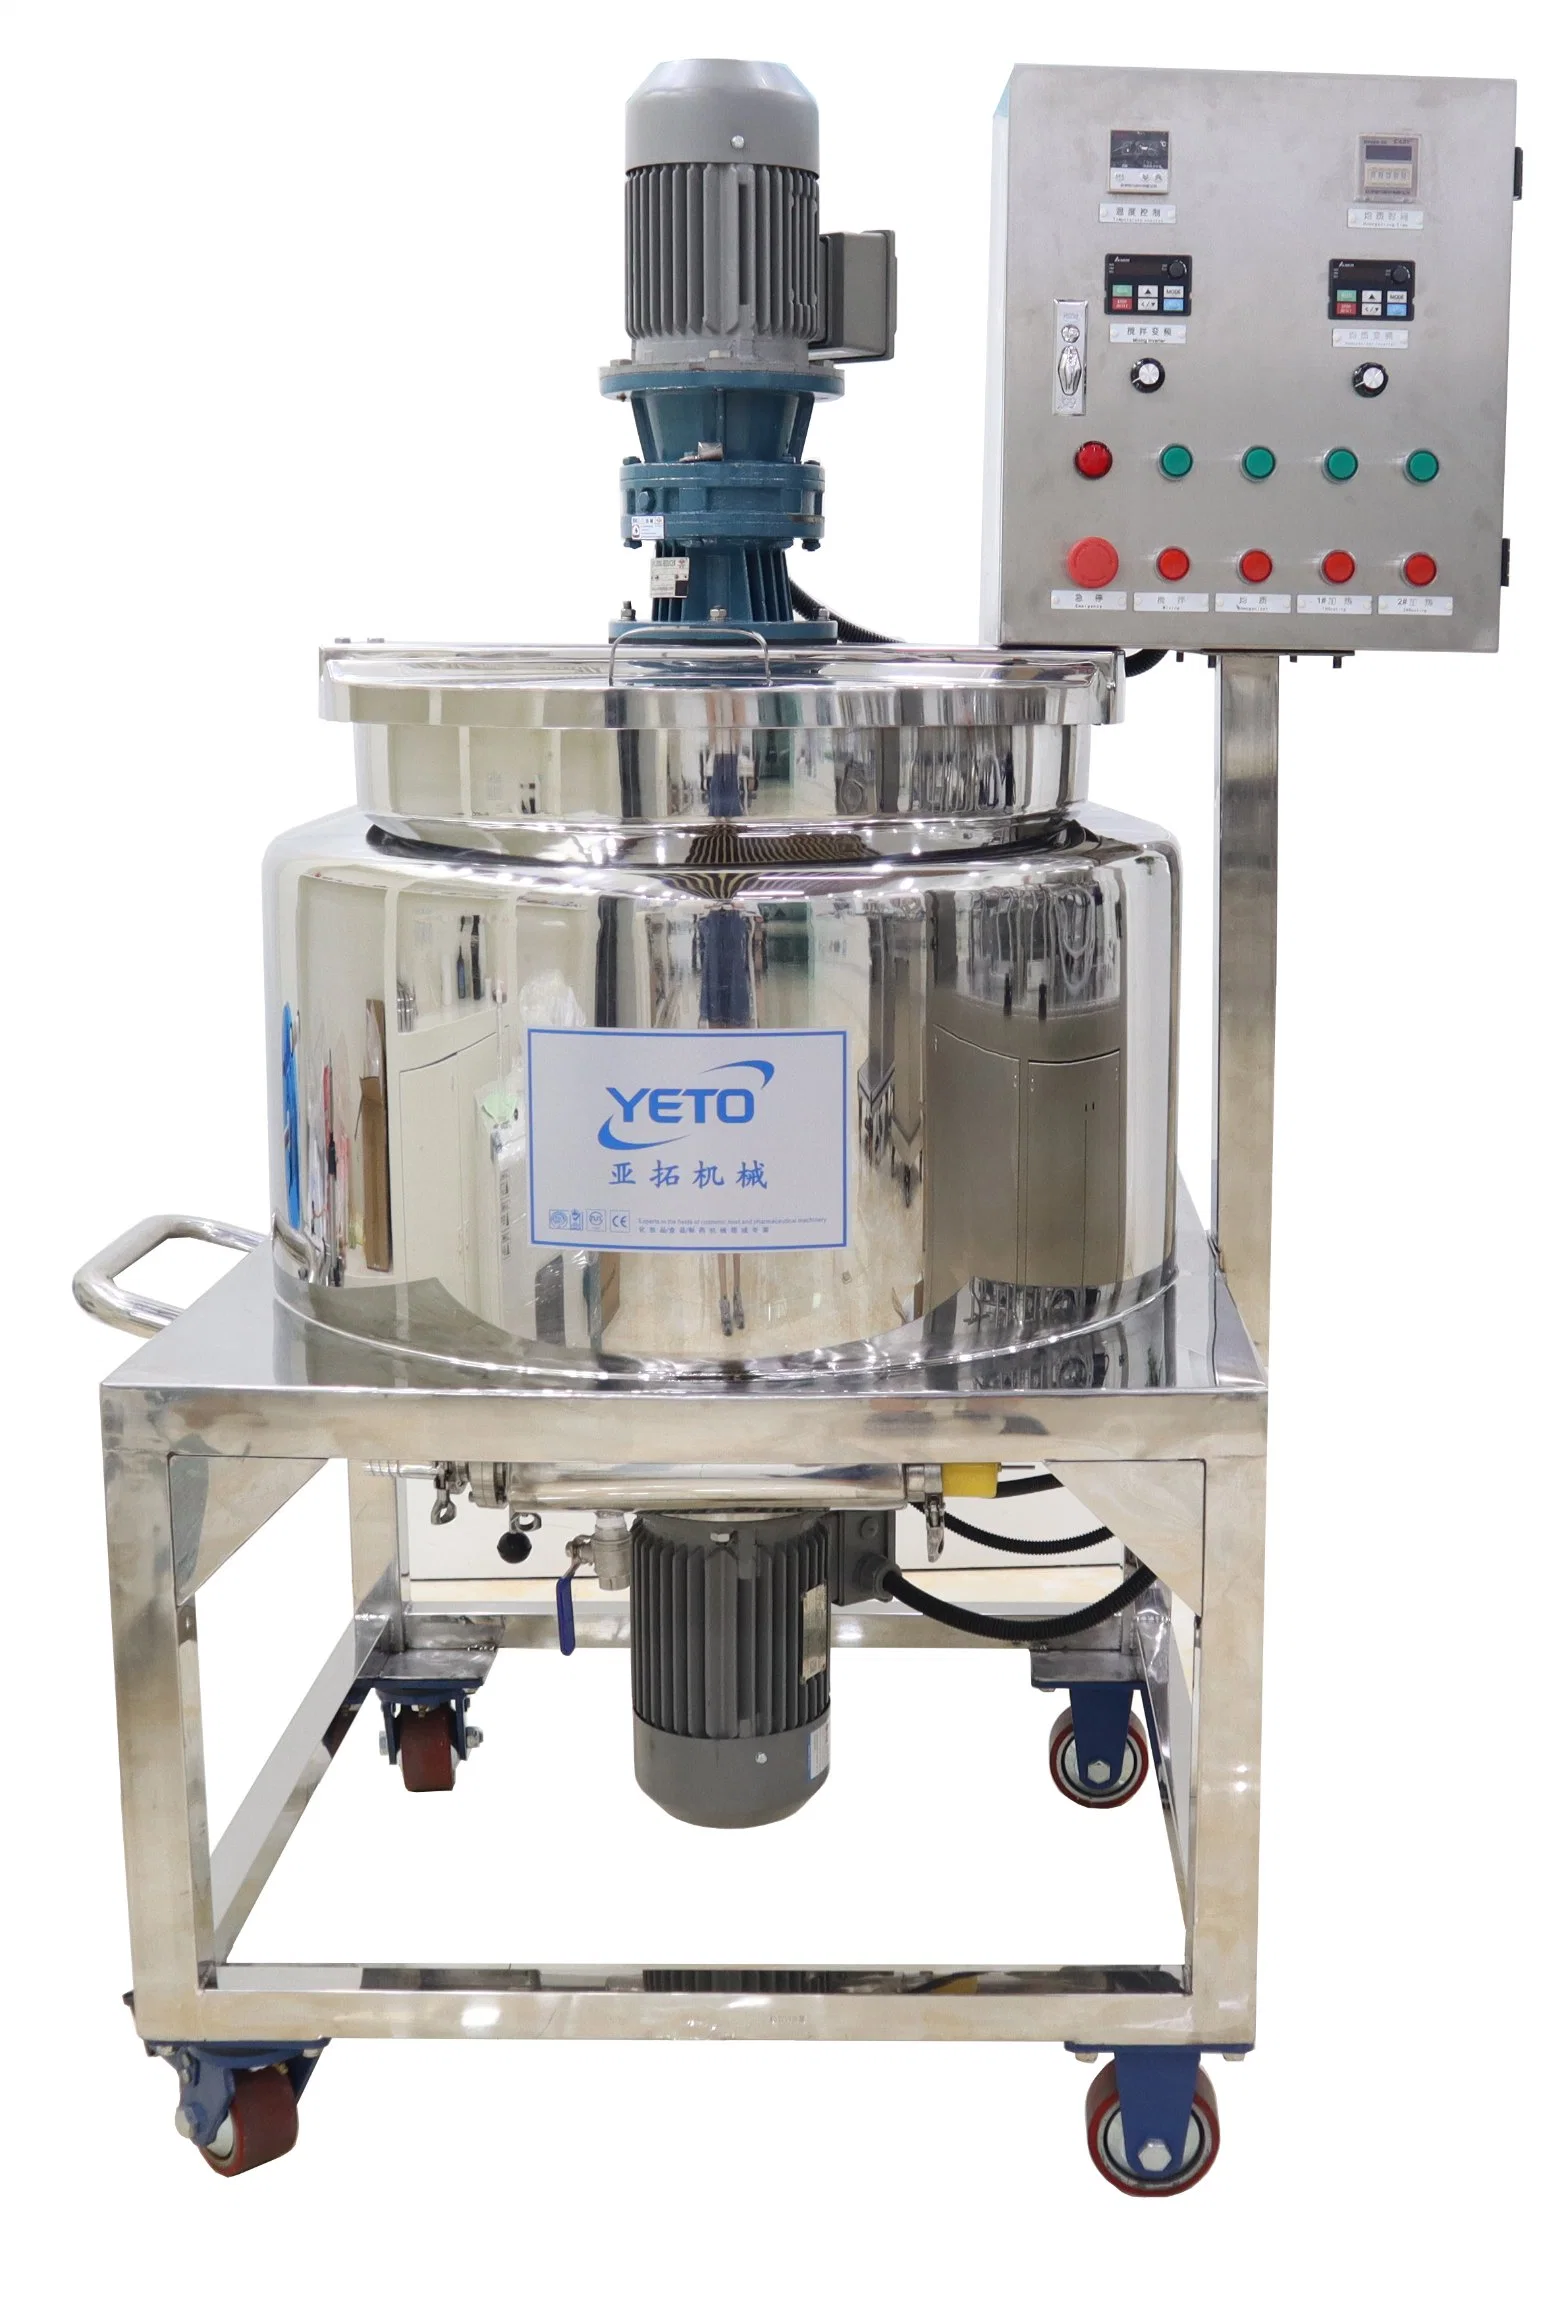 Industrial Chemical Cosmetic Liquid Mixer Detergent Heated Mixing Reactor Mixing Tank with Agitator Blender